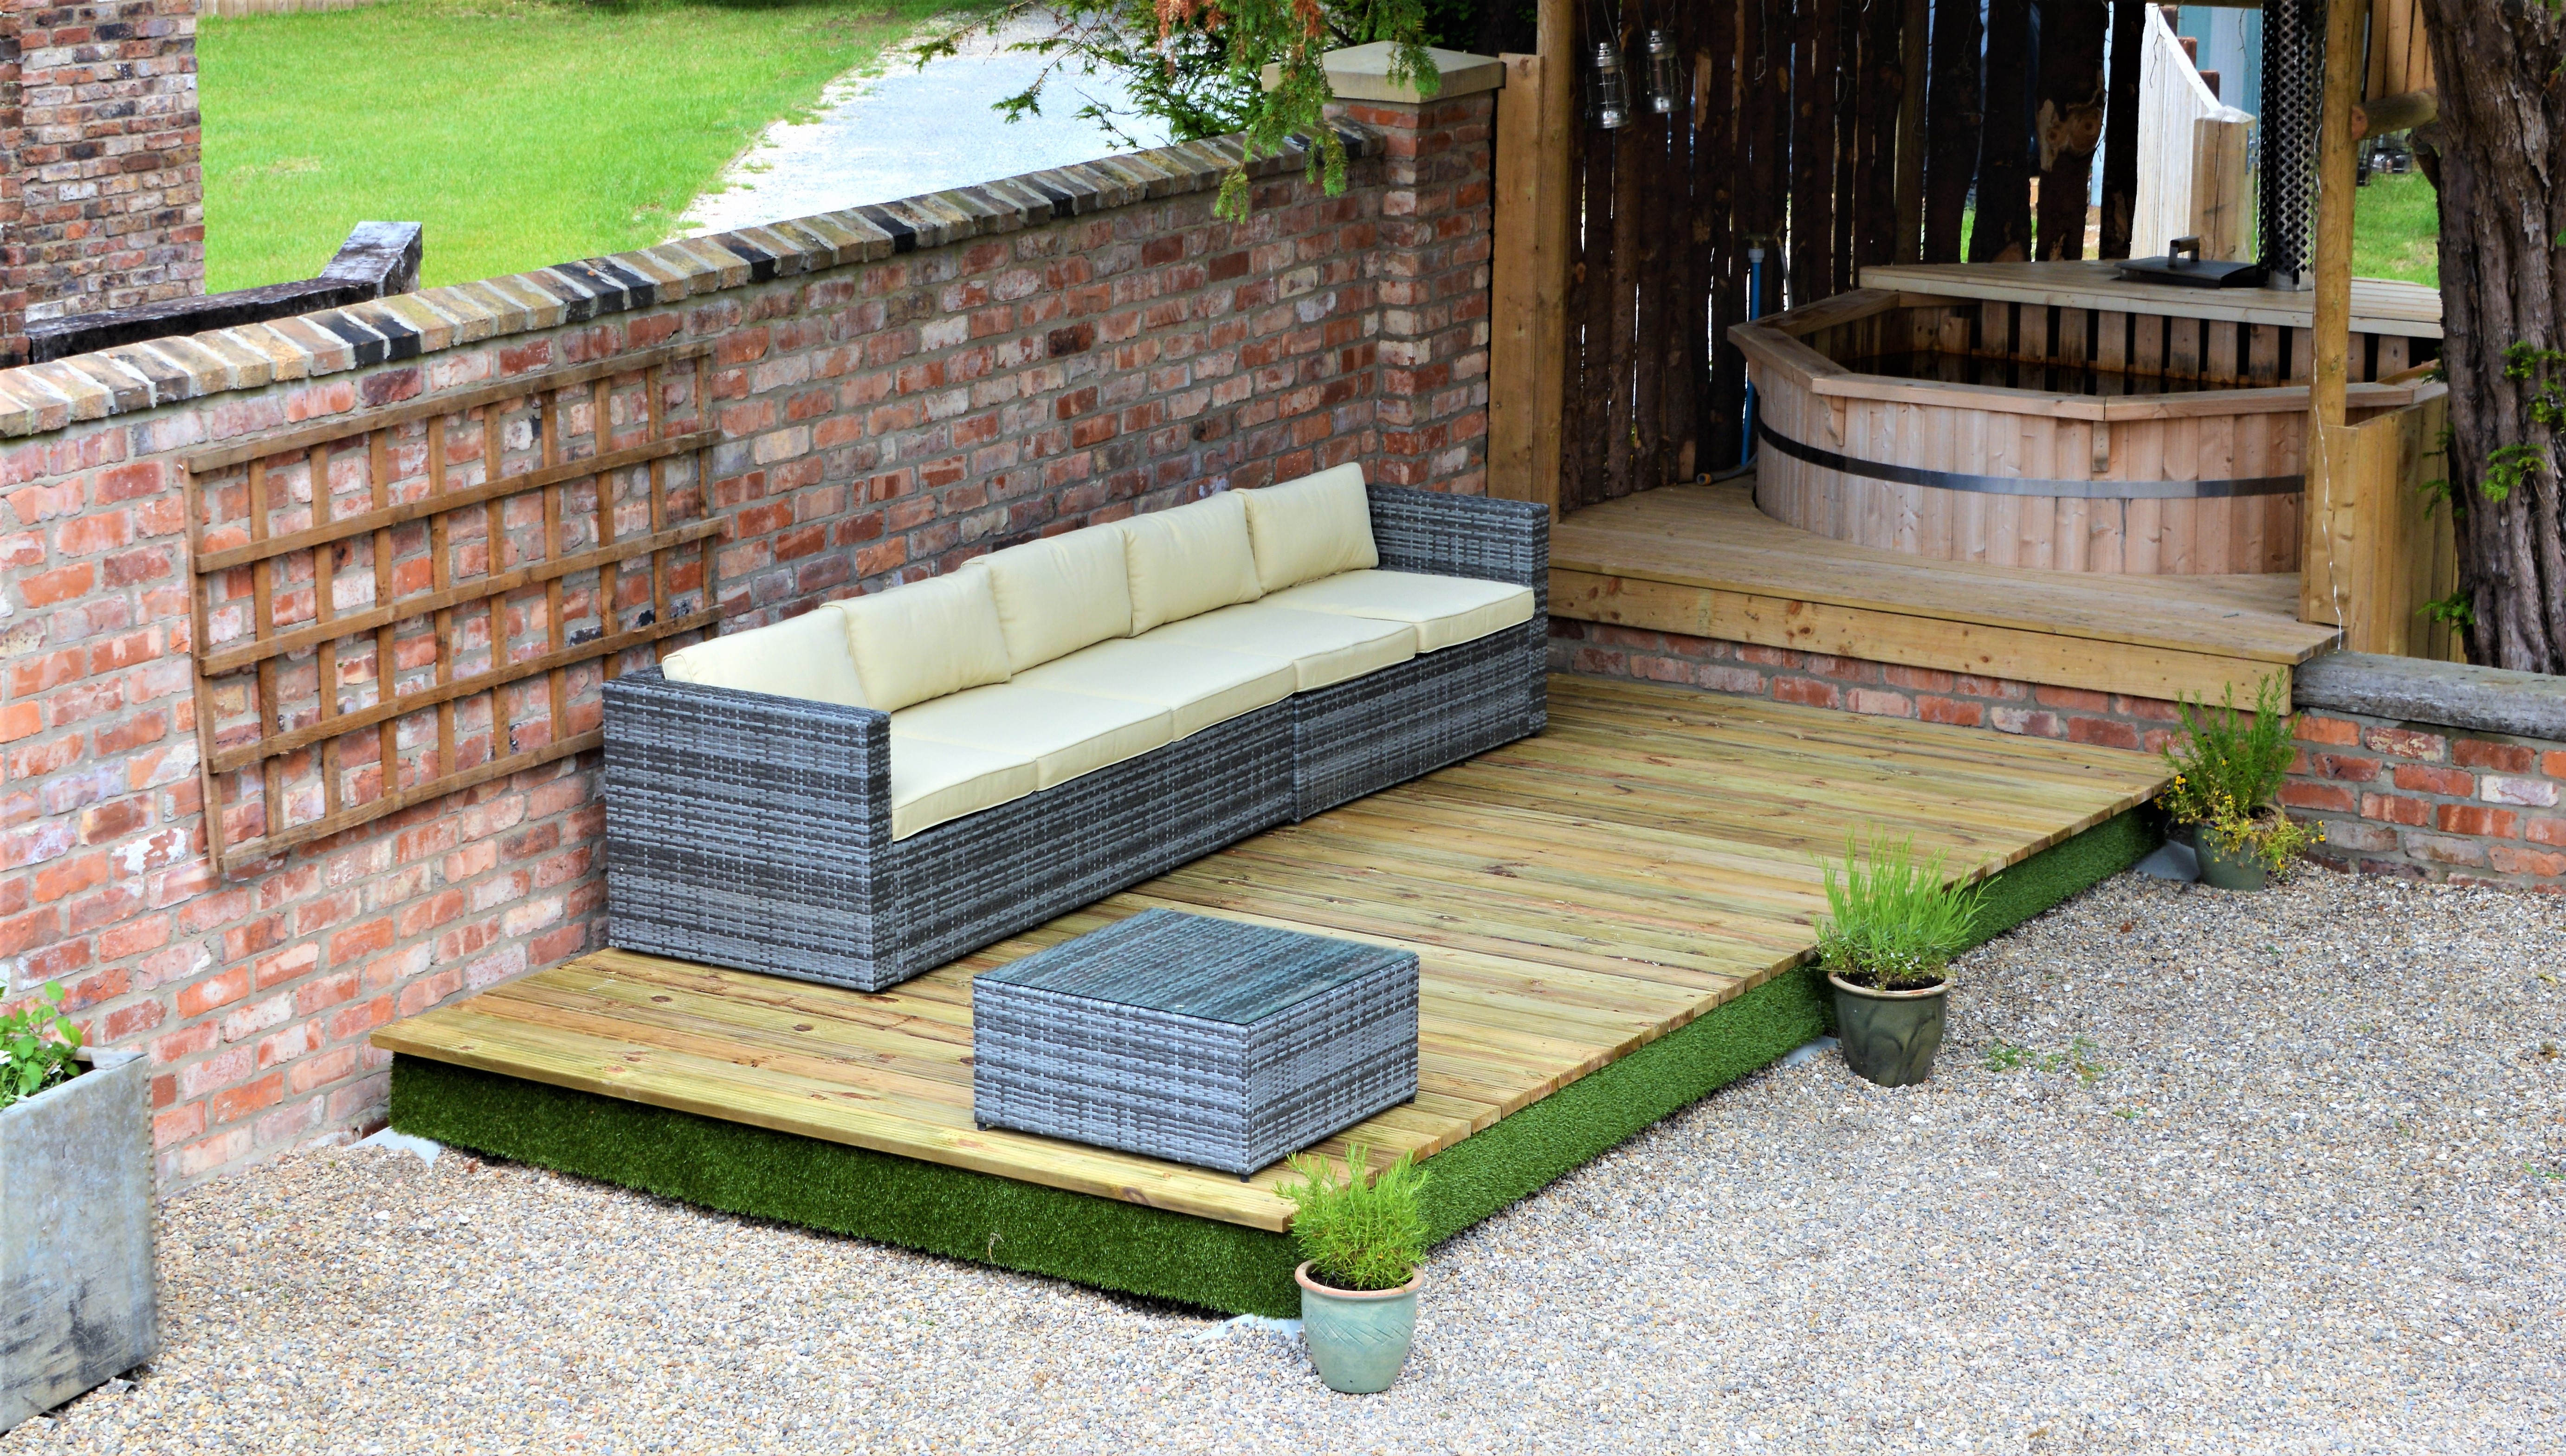 Image of Swift Deck Self-Assembly Garden Decking Kit With Adjustable Foundations - 4.75 x 7.0m